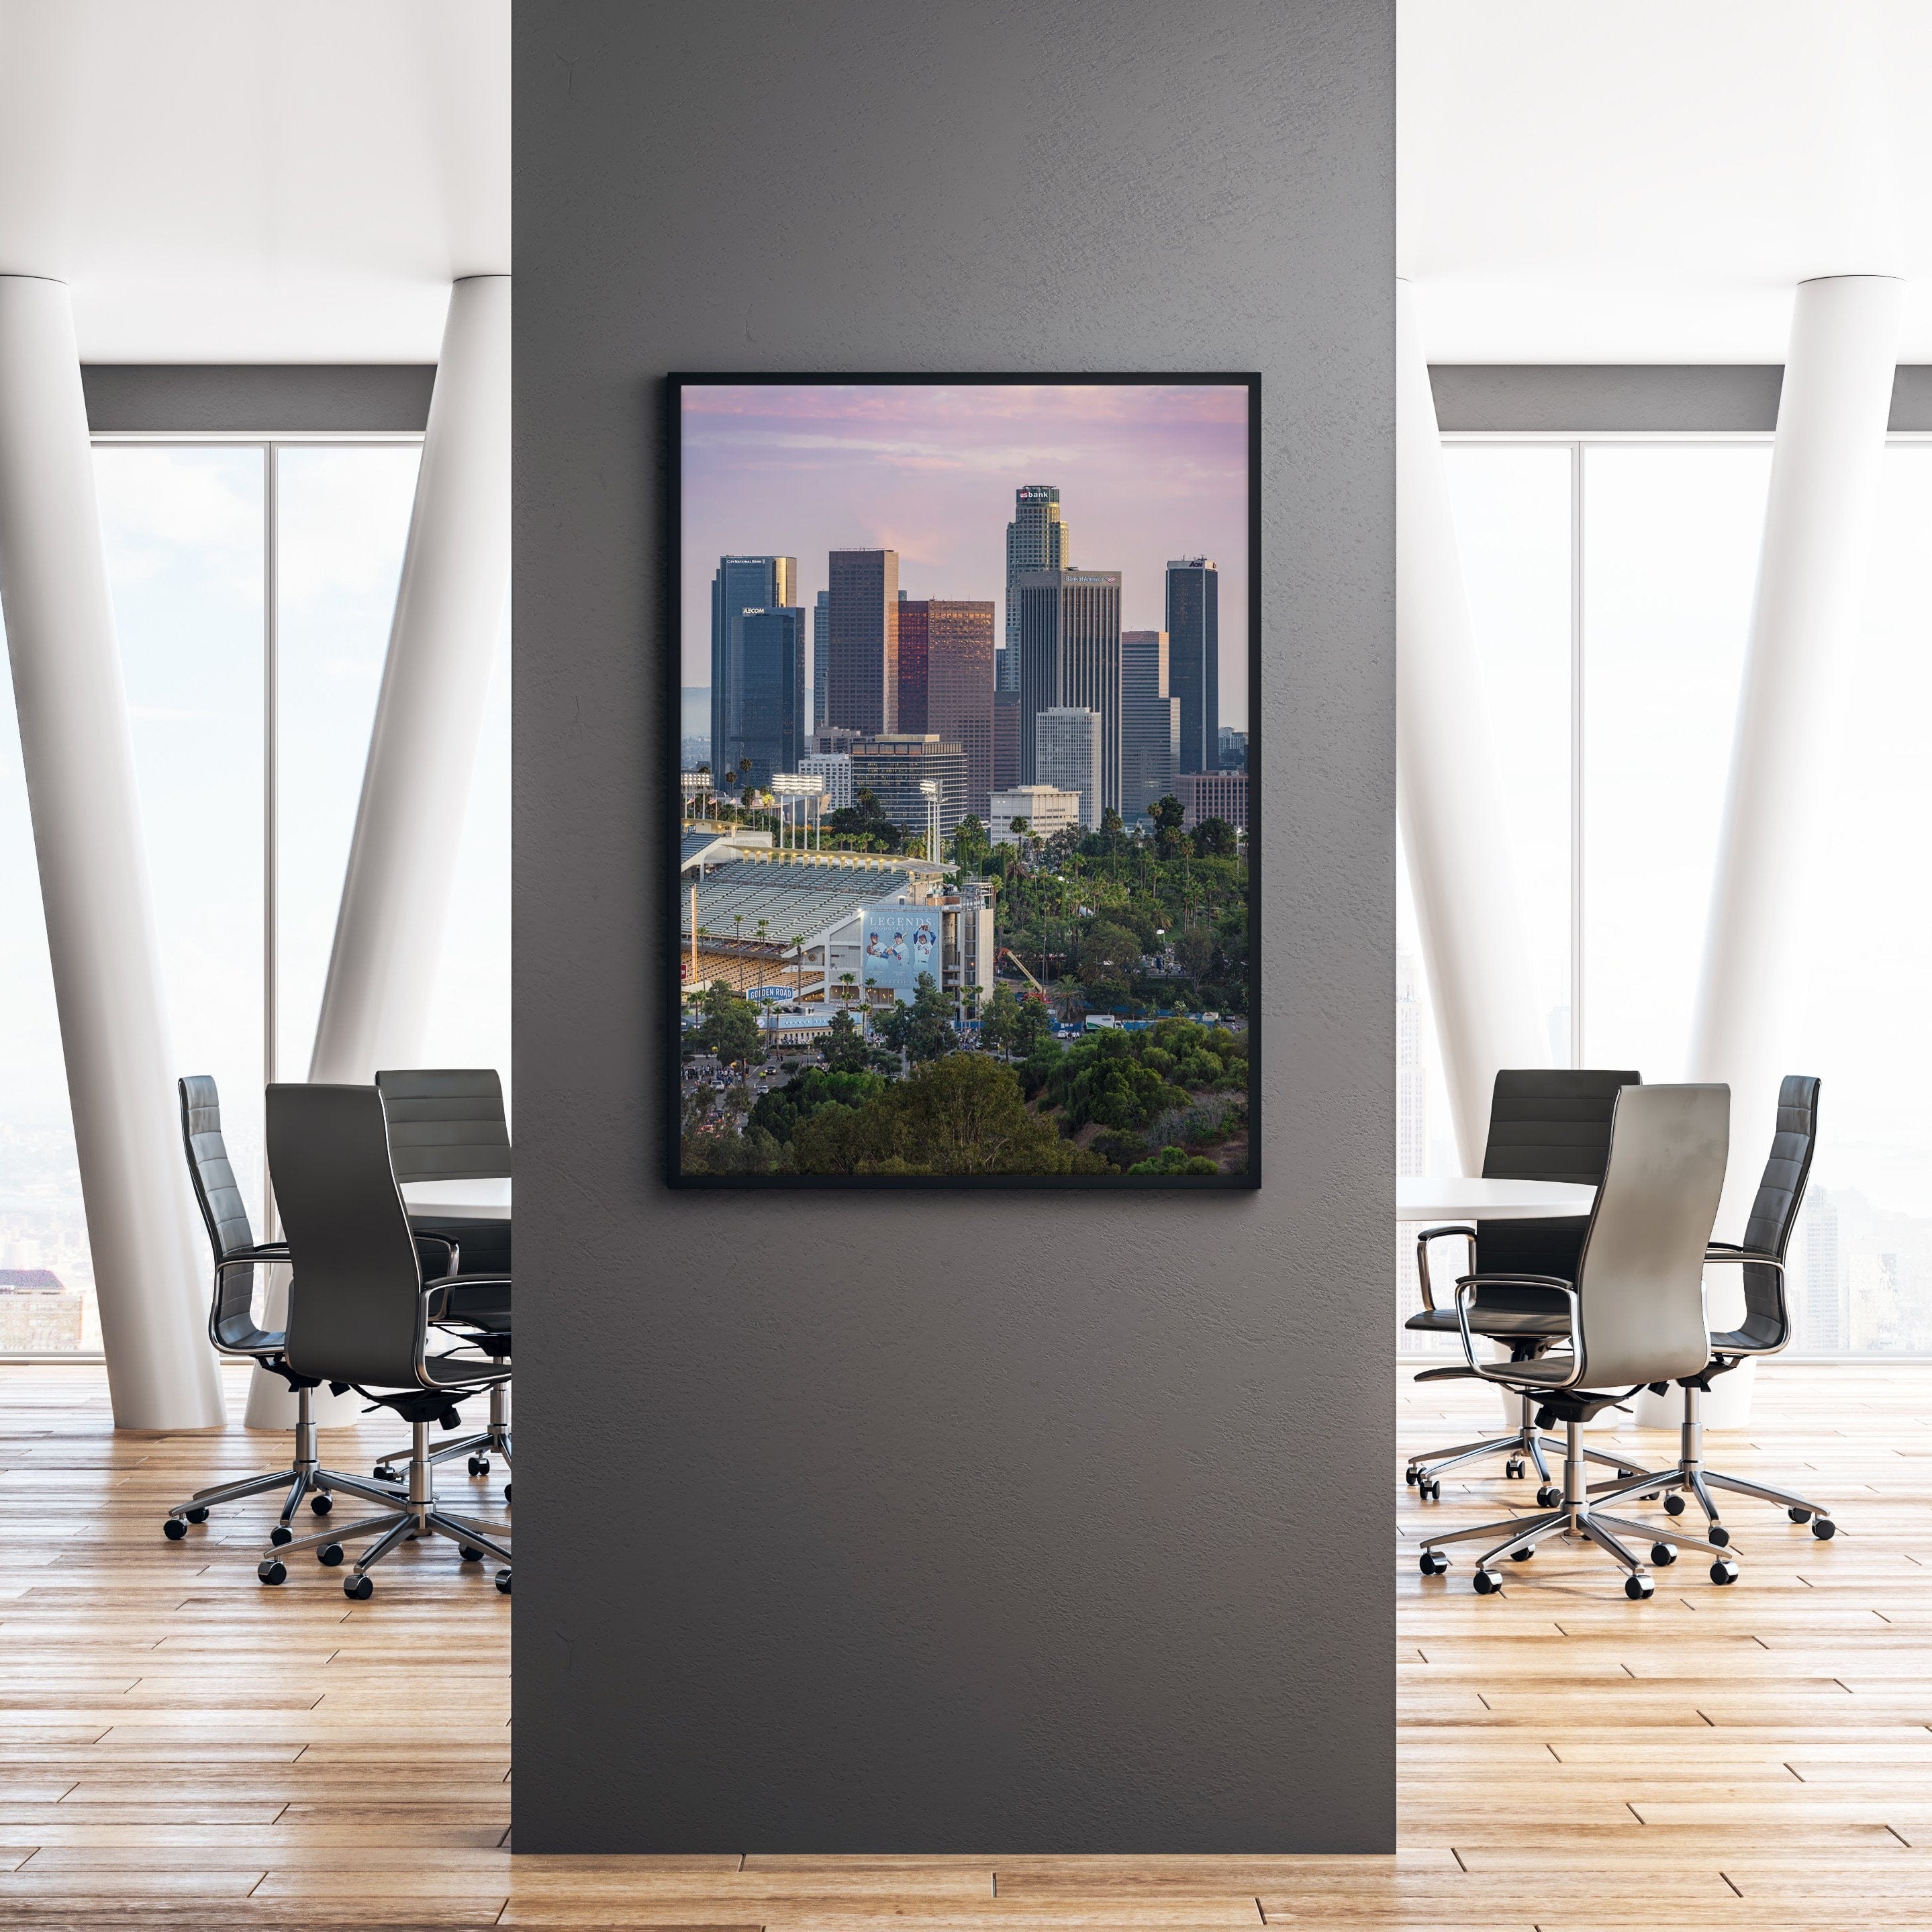  Los Angeles, California - The Famous Dodger Stadium with  Downtown LA in the Background Pictures for Living Room 5 Piece Canvas Wall  Art Modern Artwork Home Decor Stretched Ready to Hang 